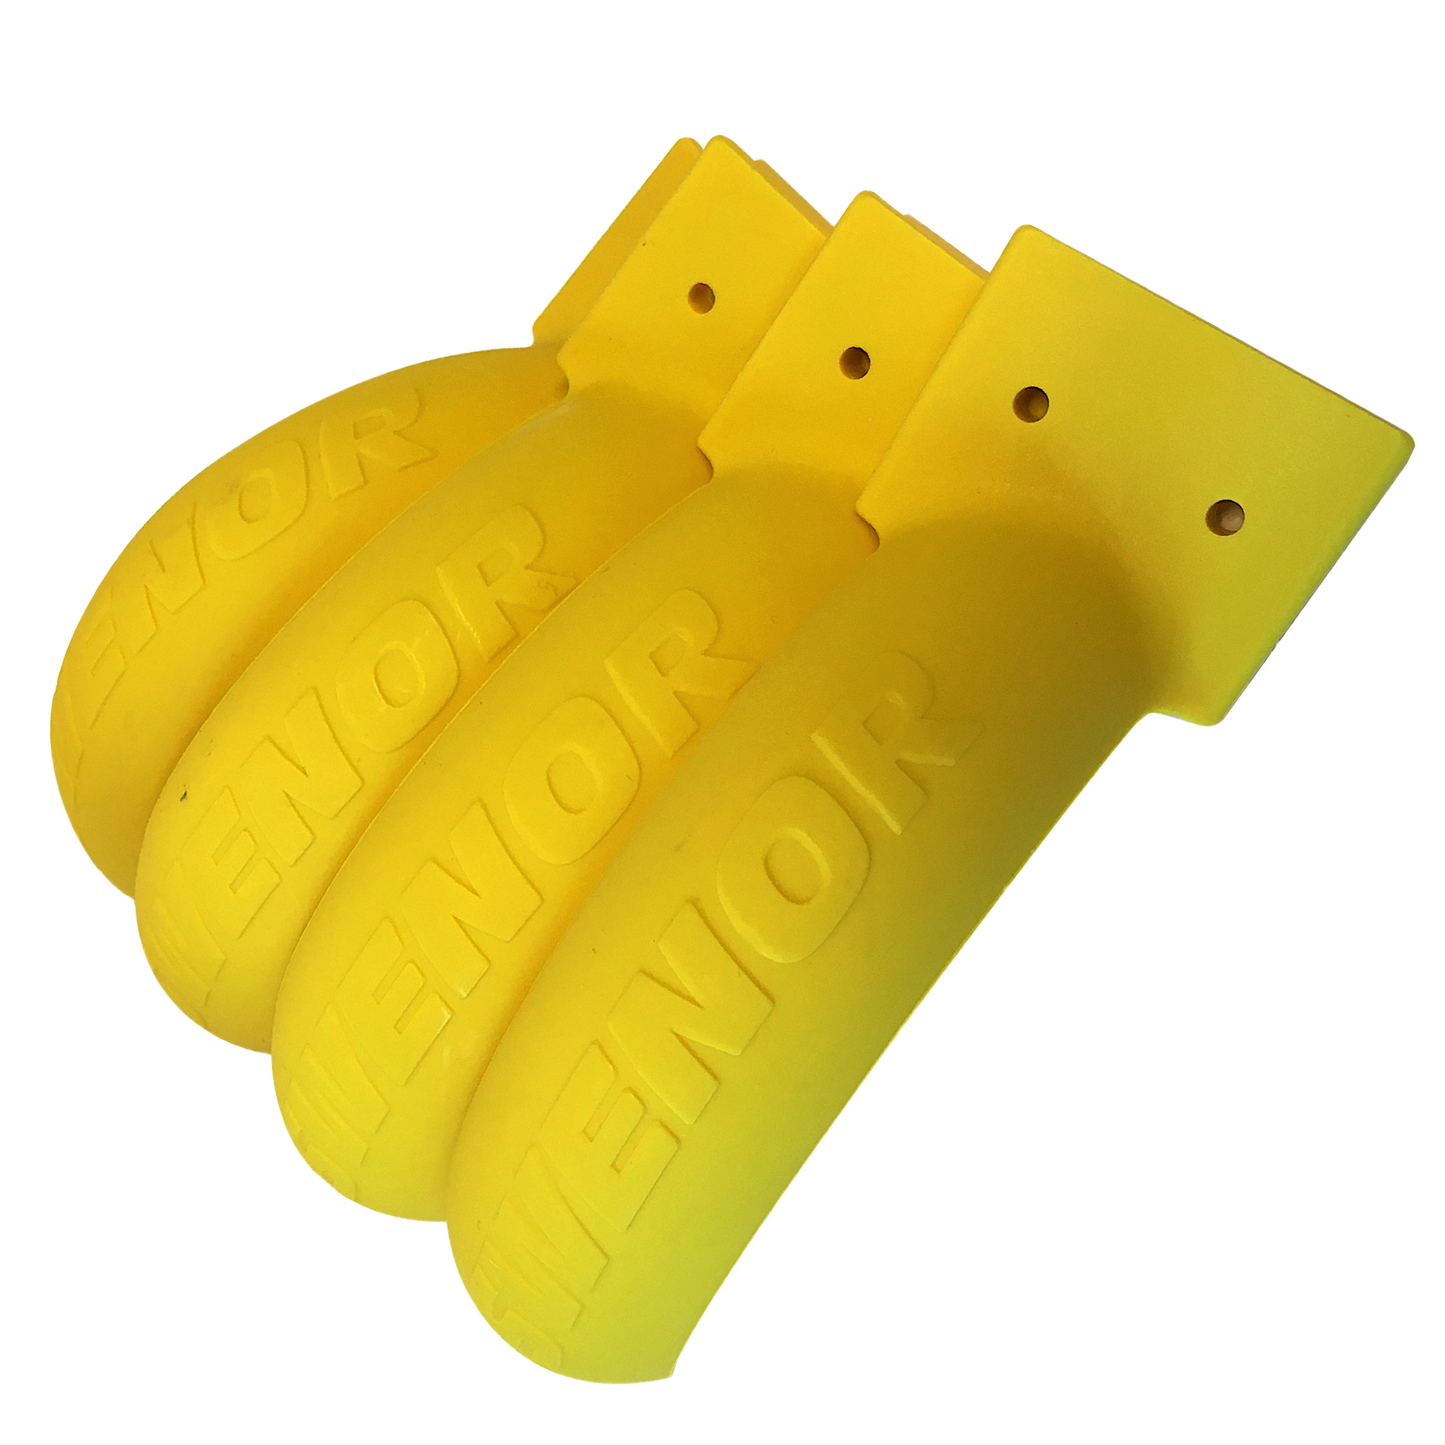 A product picture of the Swenor Elite Skate Fenders Pack of 4